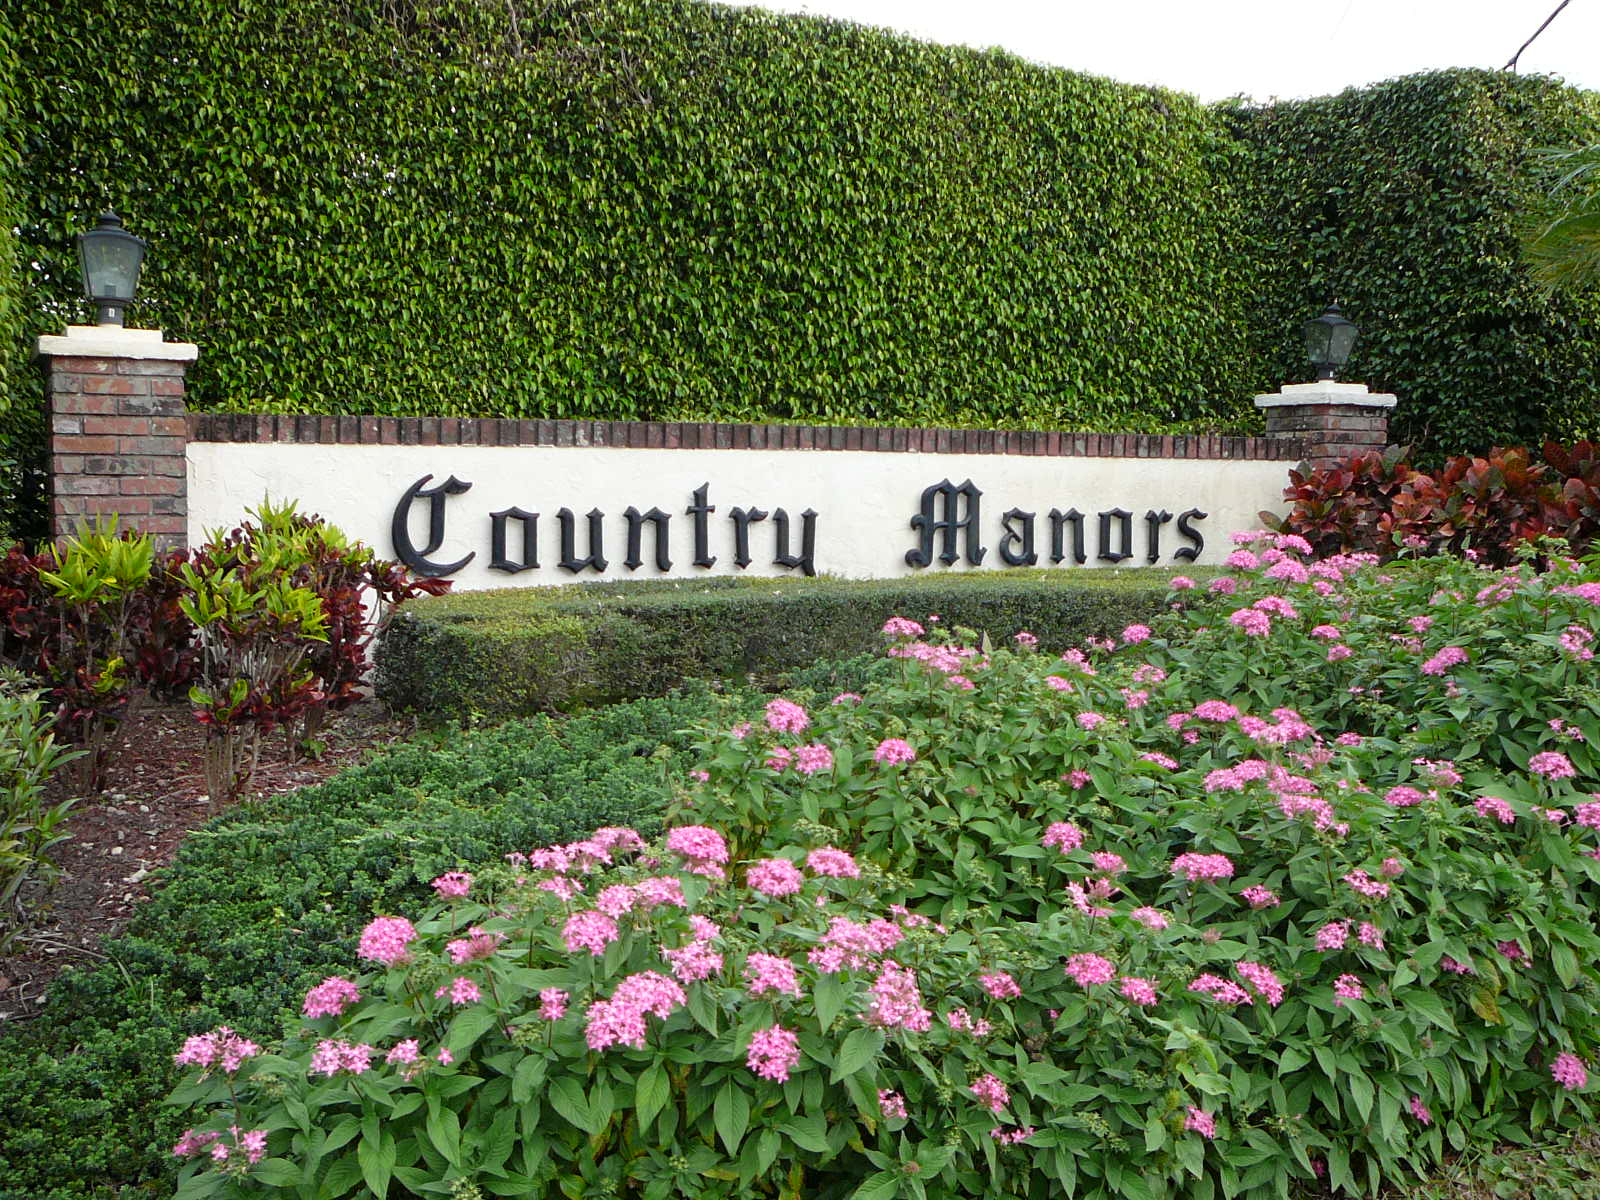 A sign that says country manors in front of some bushes